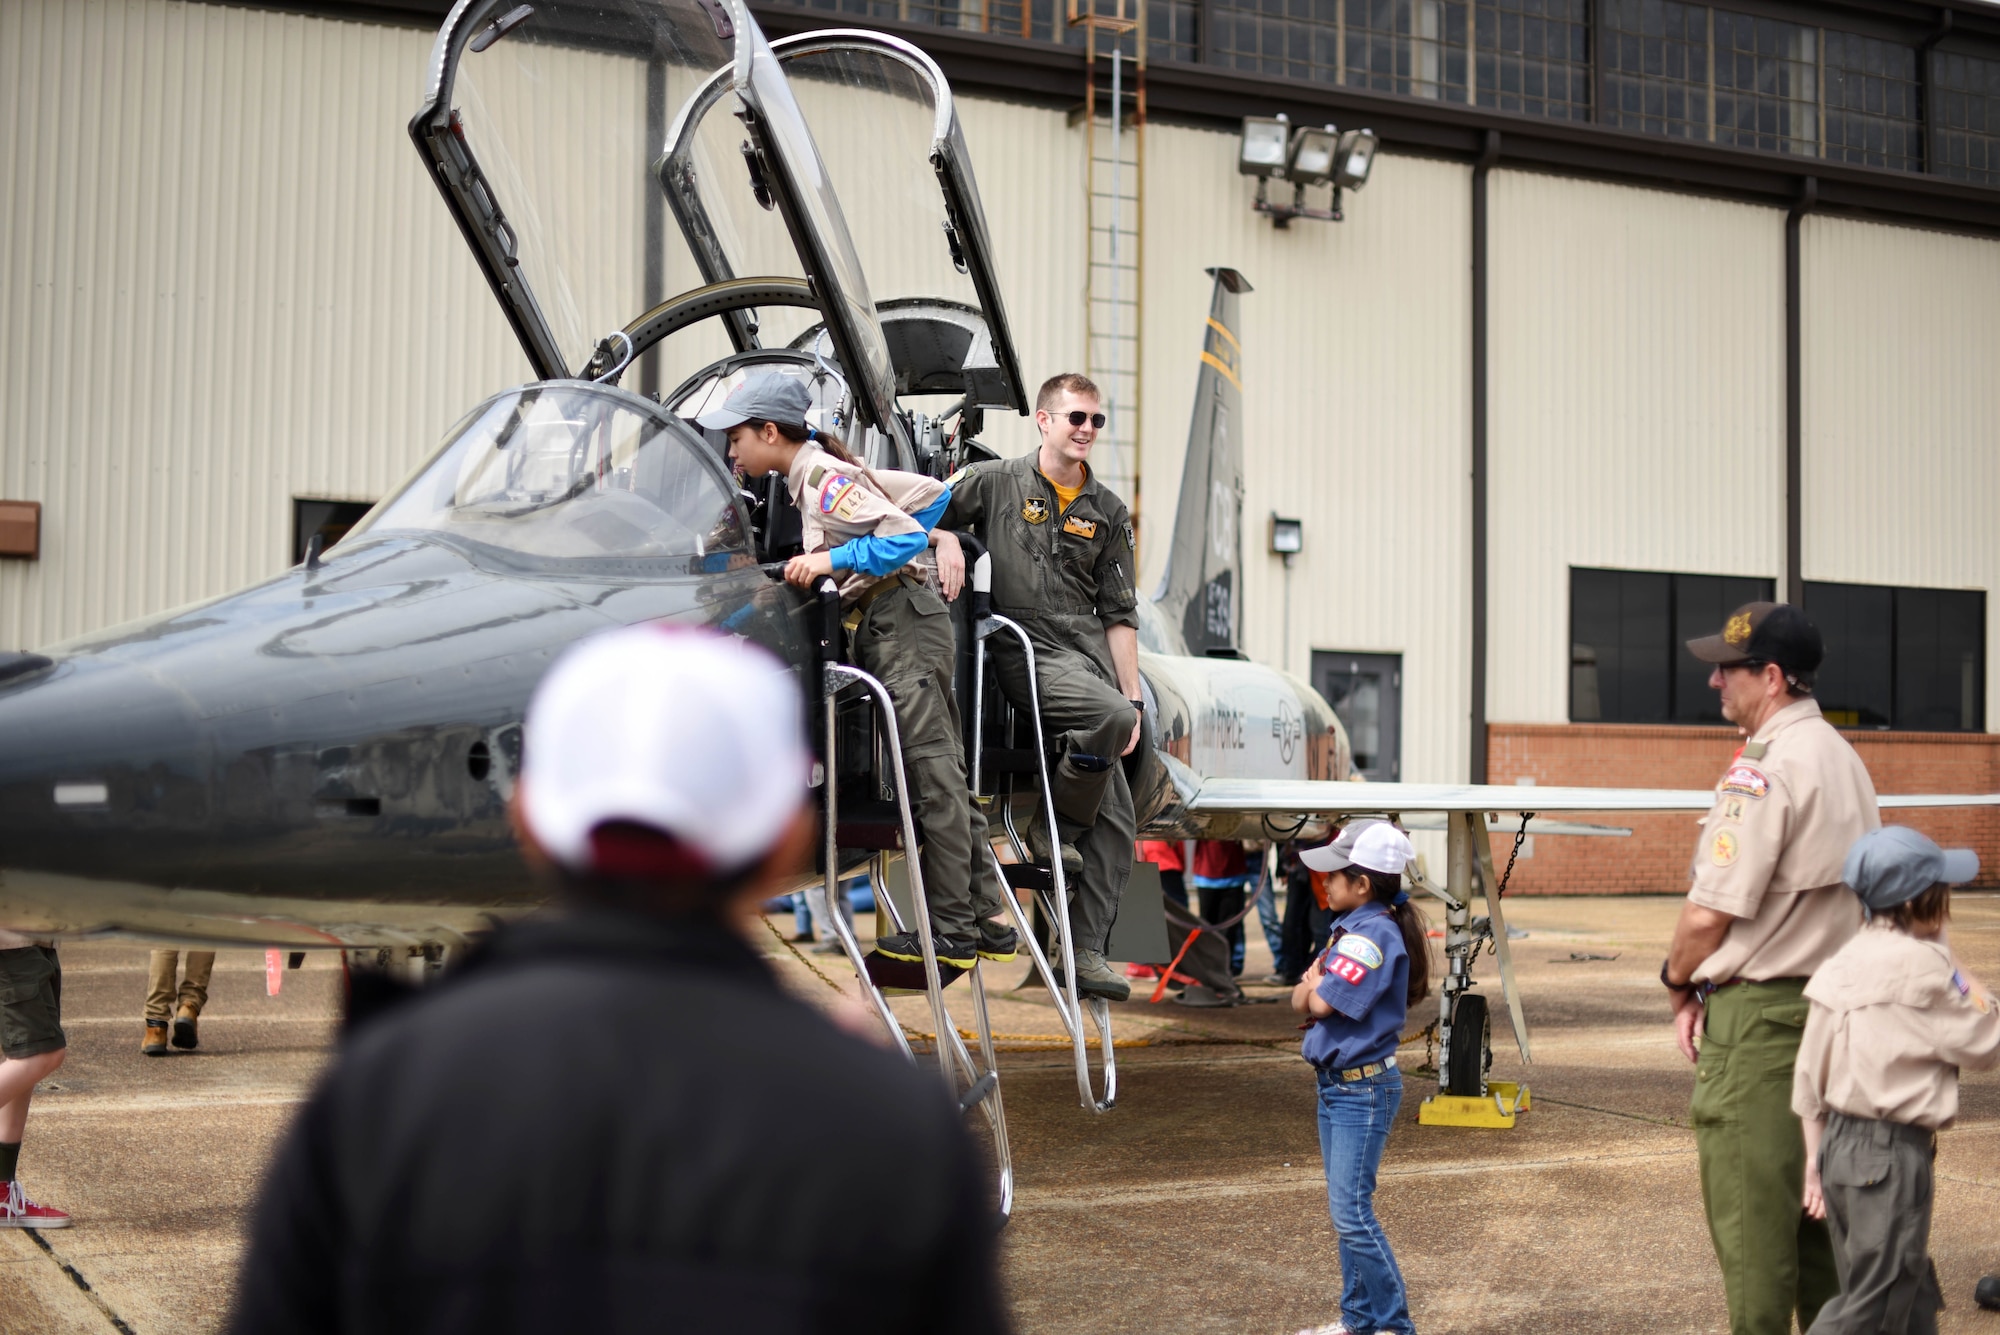 Scouts, Boy Scouts of America members look inside a T-38C Talon March 30, 2019, on Columbus Air Force Base, Mississippi. The scouts were able to see each training airframe the 14th Flying Training Wing uses to create the next generation of military aviators. (U.S. Air Force photo by Airman 1st Class Keith Holcomb)